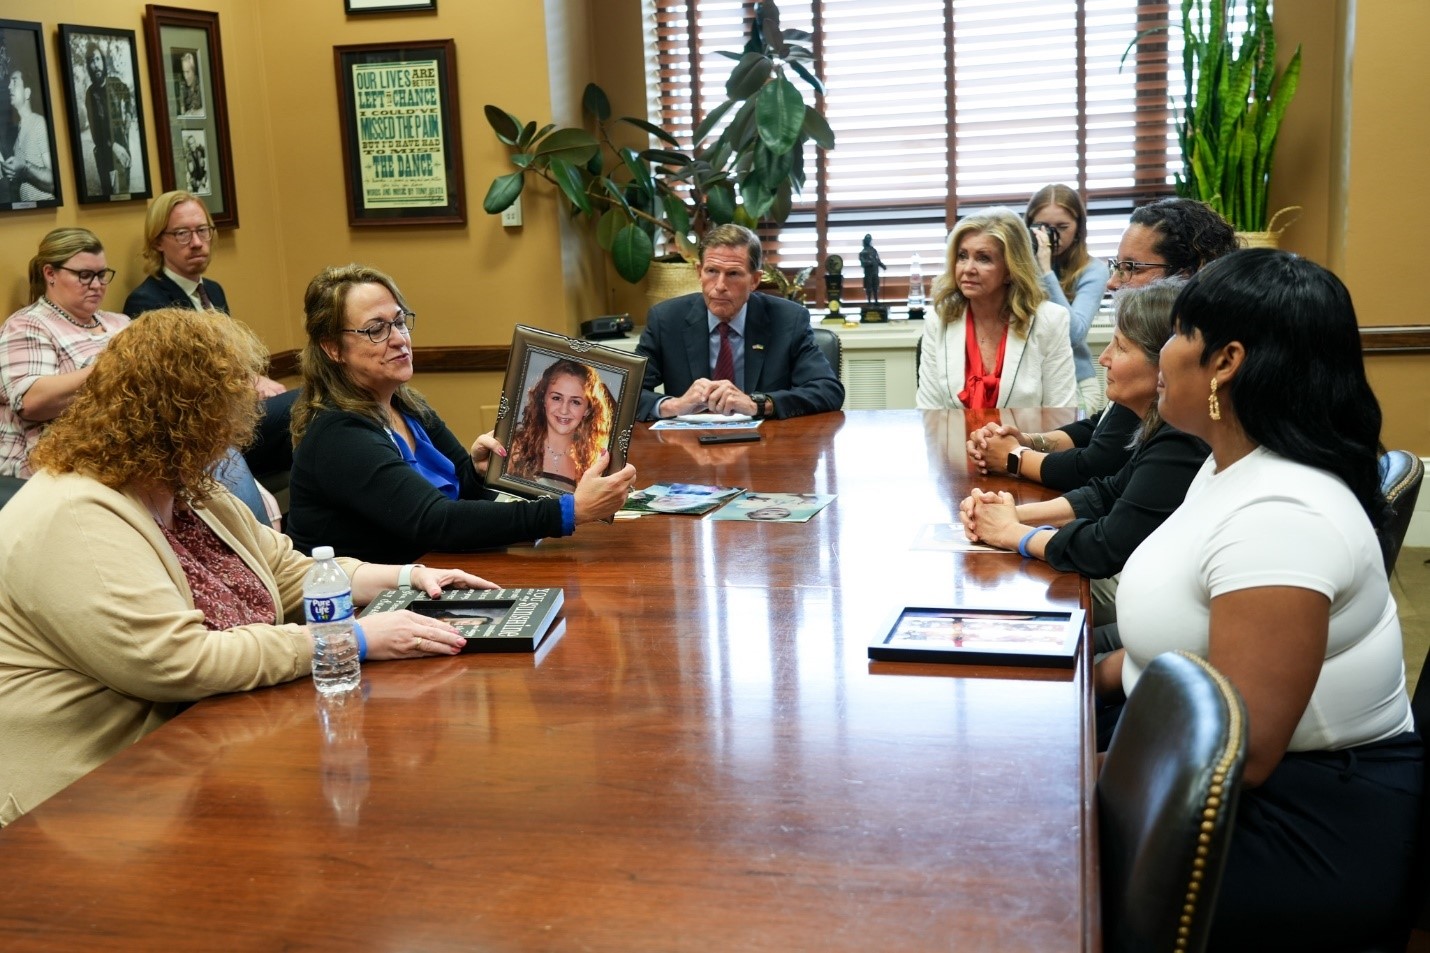 U.S. Senators Richard Blumenthal (D-CT) and Marsha Blackburn (R-TN), authors of the Kids Online Safety Act, met with parents of children who died or were harmed because of social media to discuss the urgent need for passage of the bipartisan legislation. 